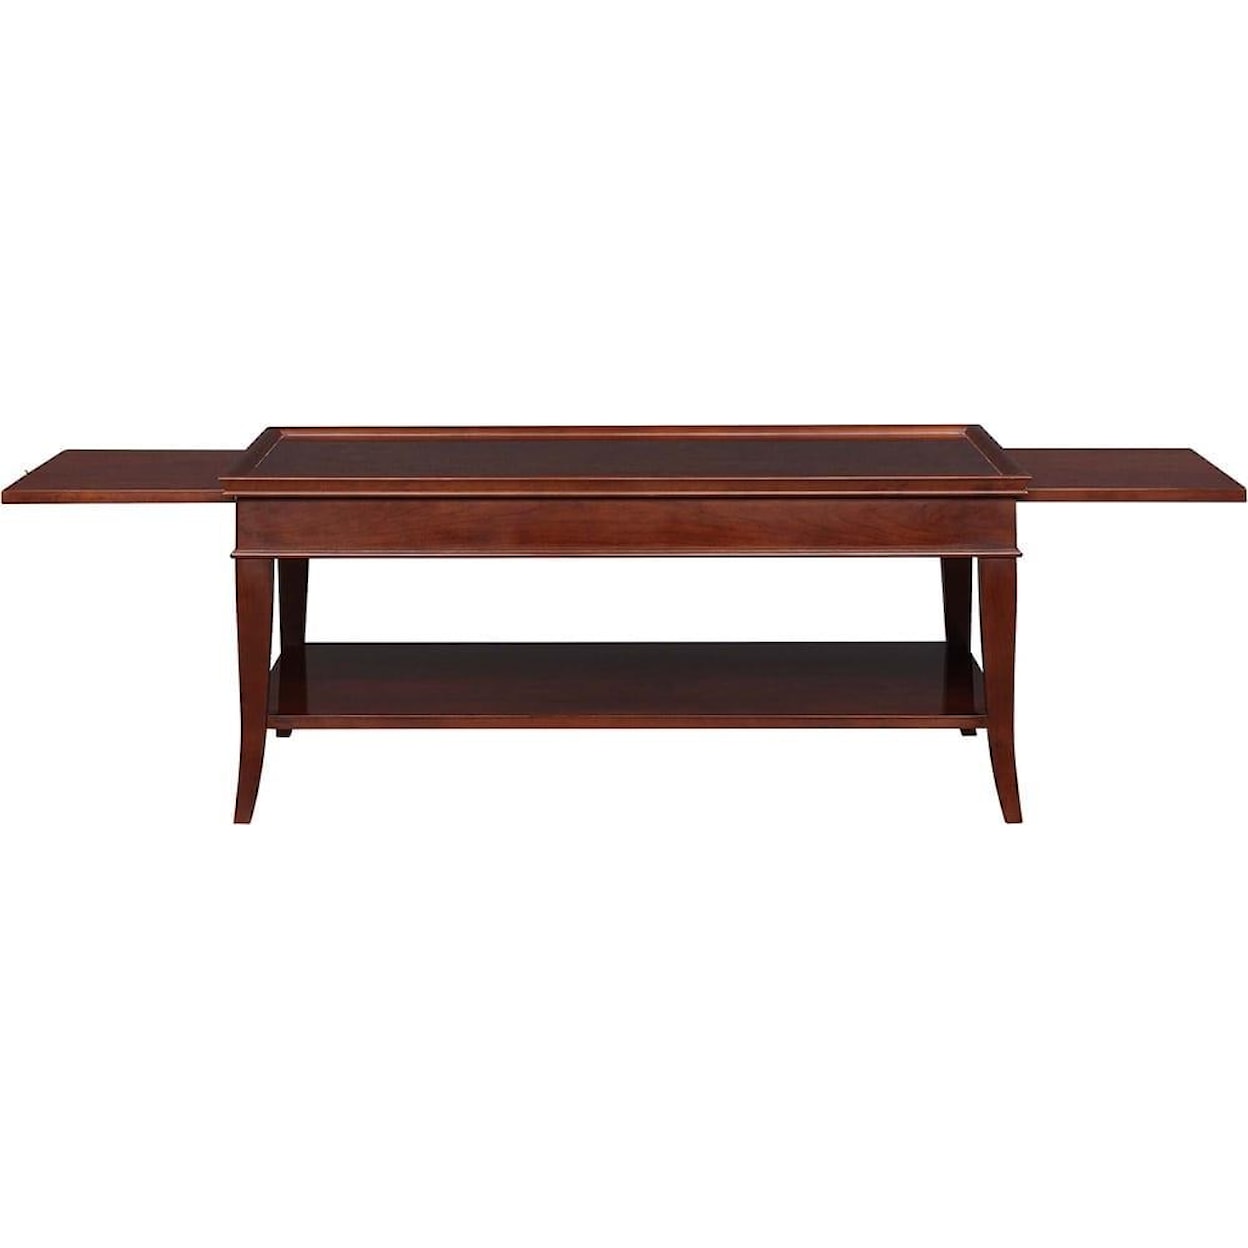 Stickley Classics Cherry and Mahogany Brewster Cocktail Table